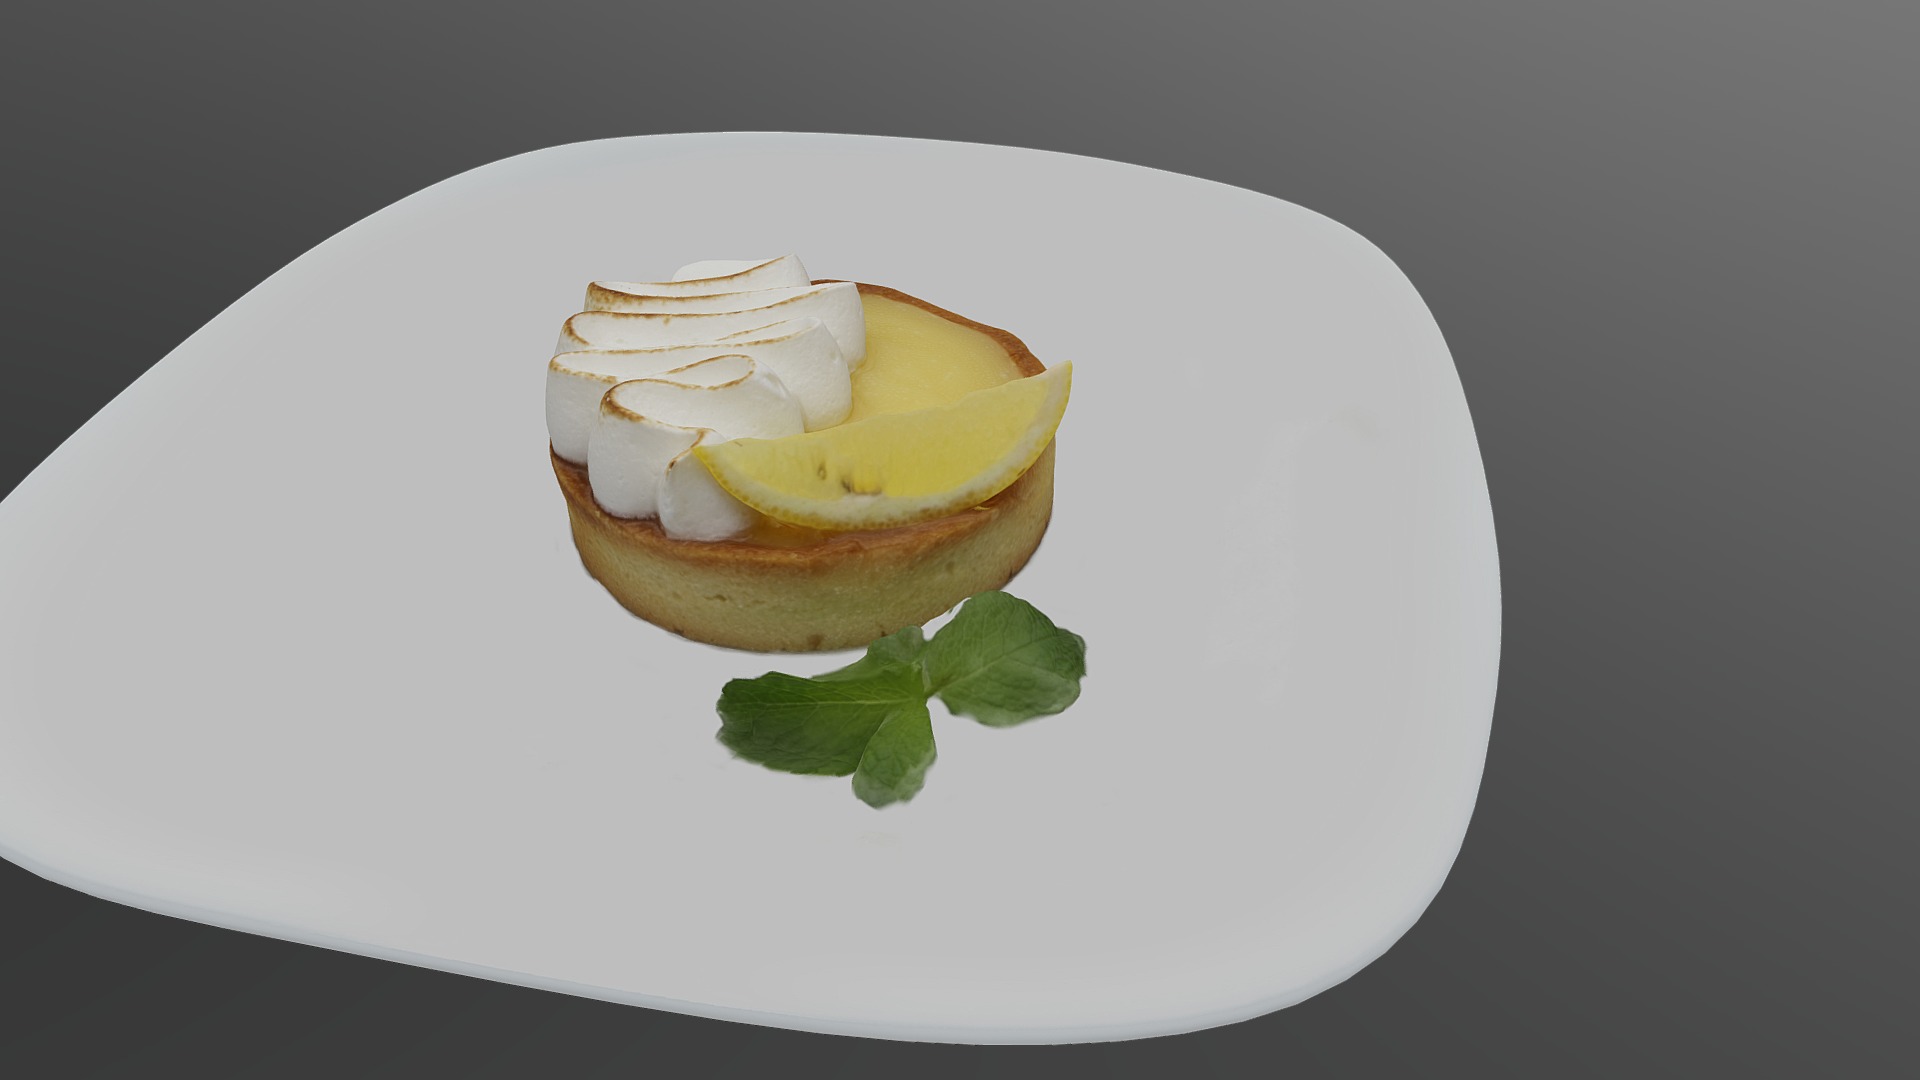 3D model 1Olimp - This is a 3D model of the 1Olimp. The 3D model is about a plate with food on it.